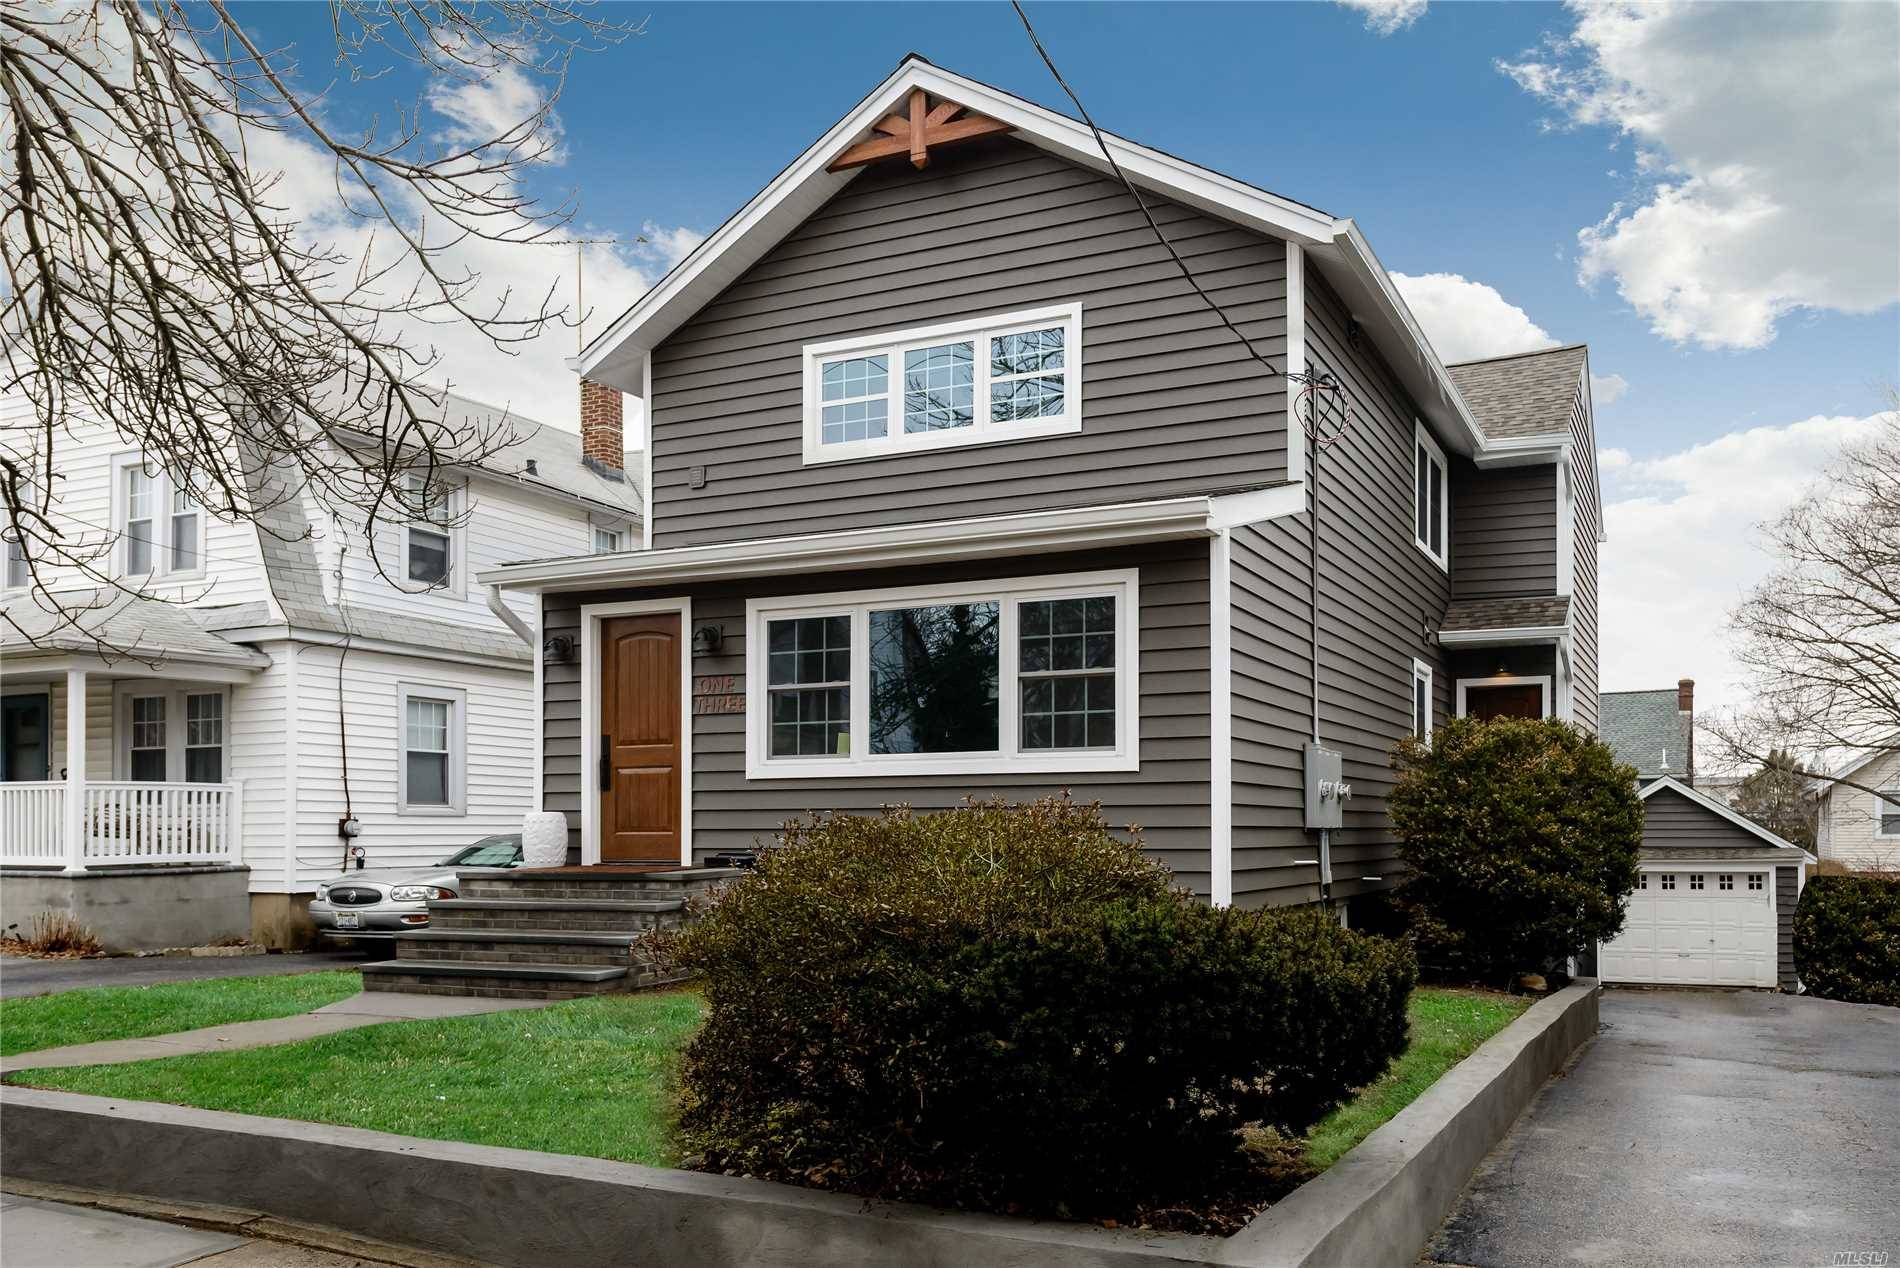 Completely Renovated 2 Family Using The Finest Materials, Open Floor Plan With Hip Urban Feel.